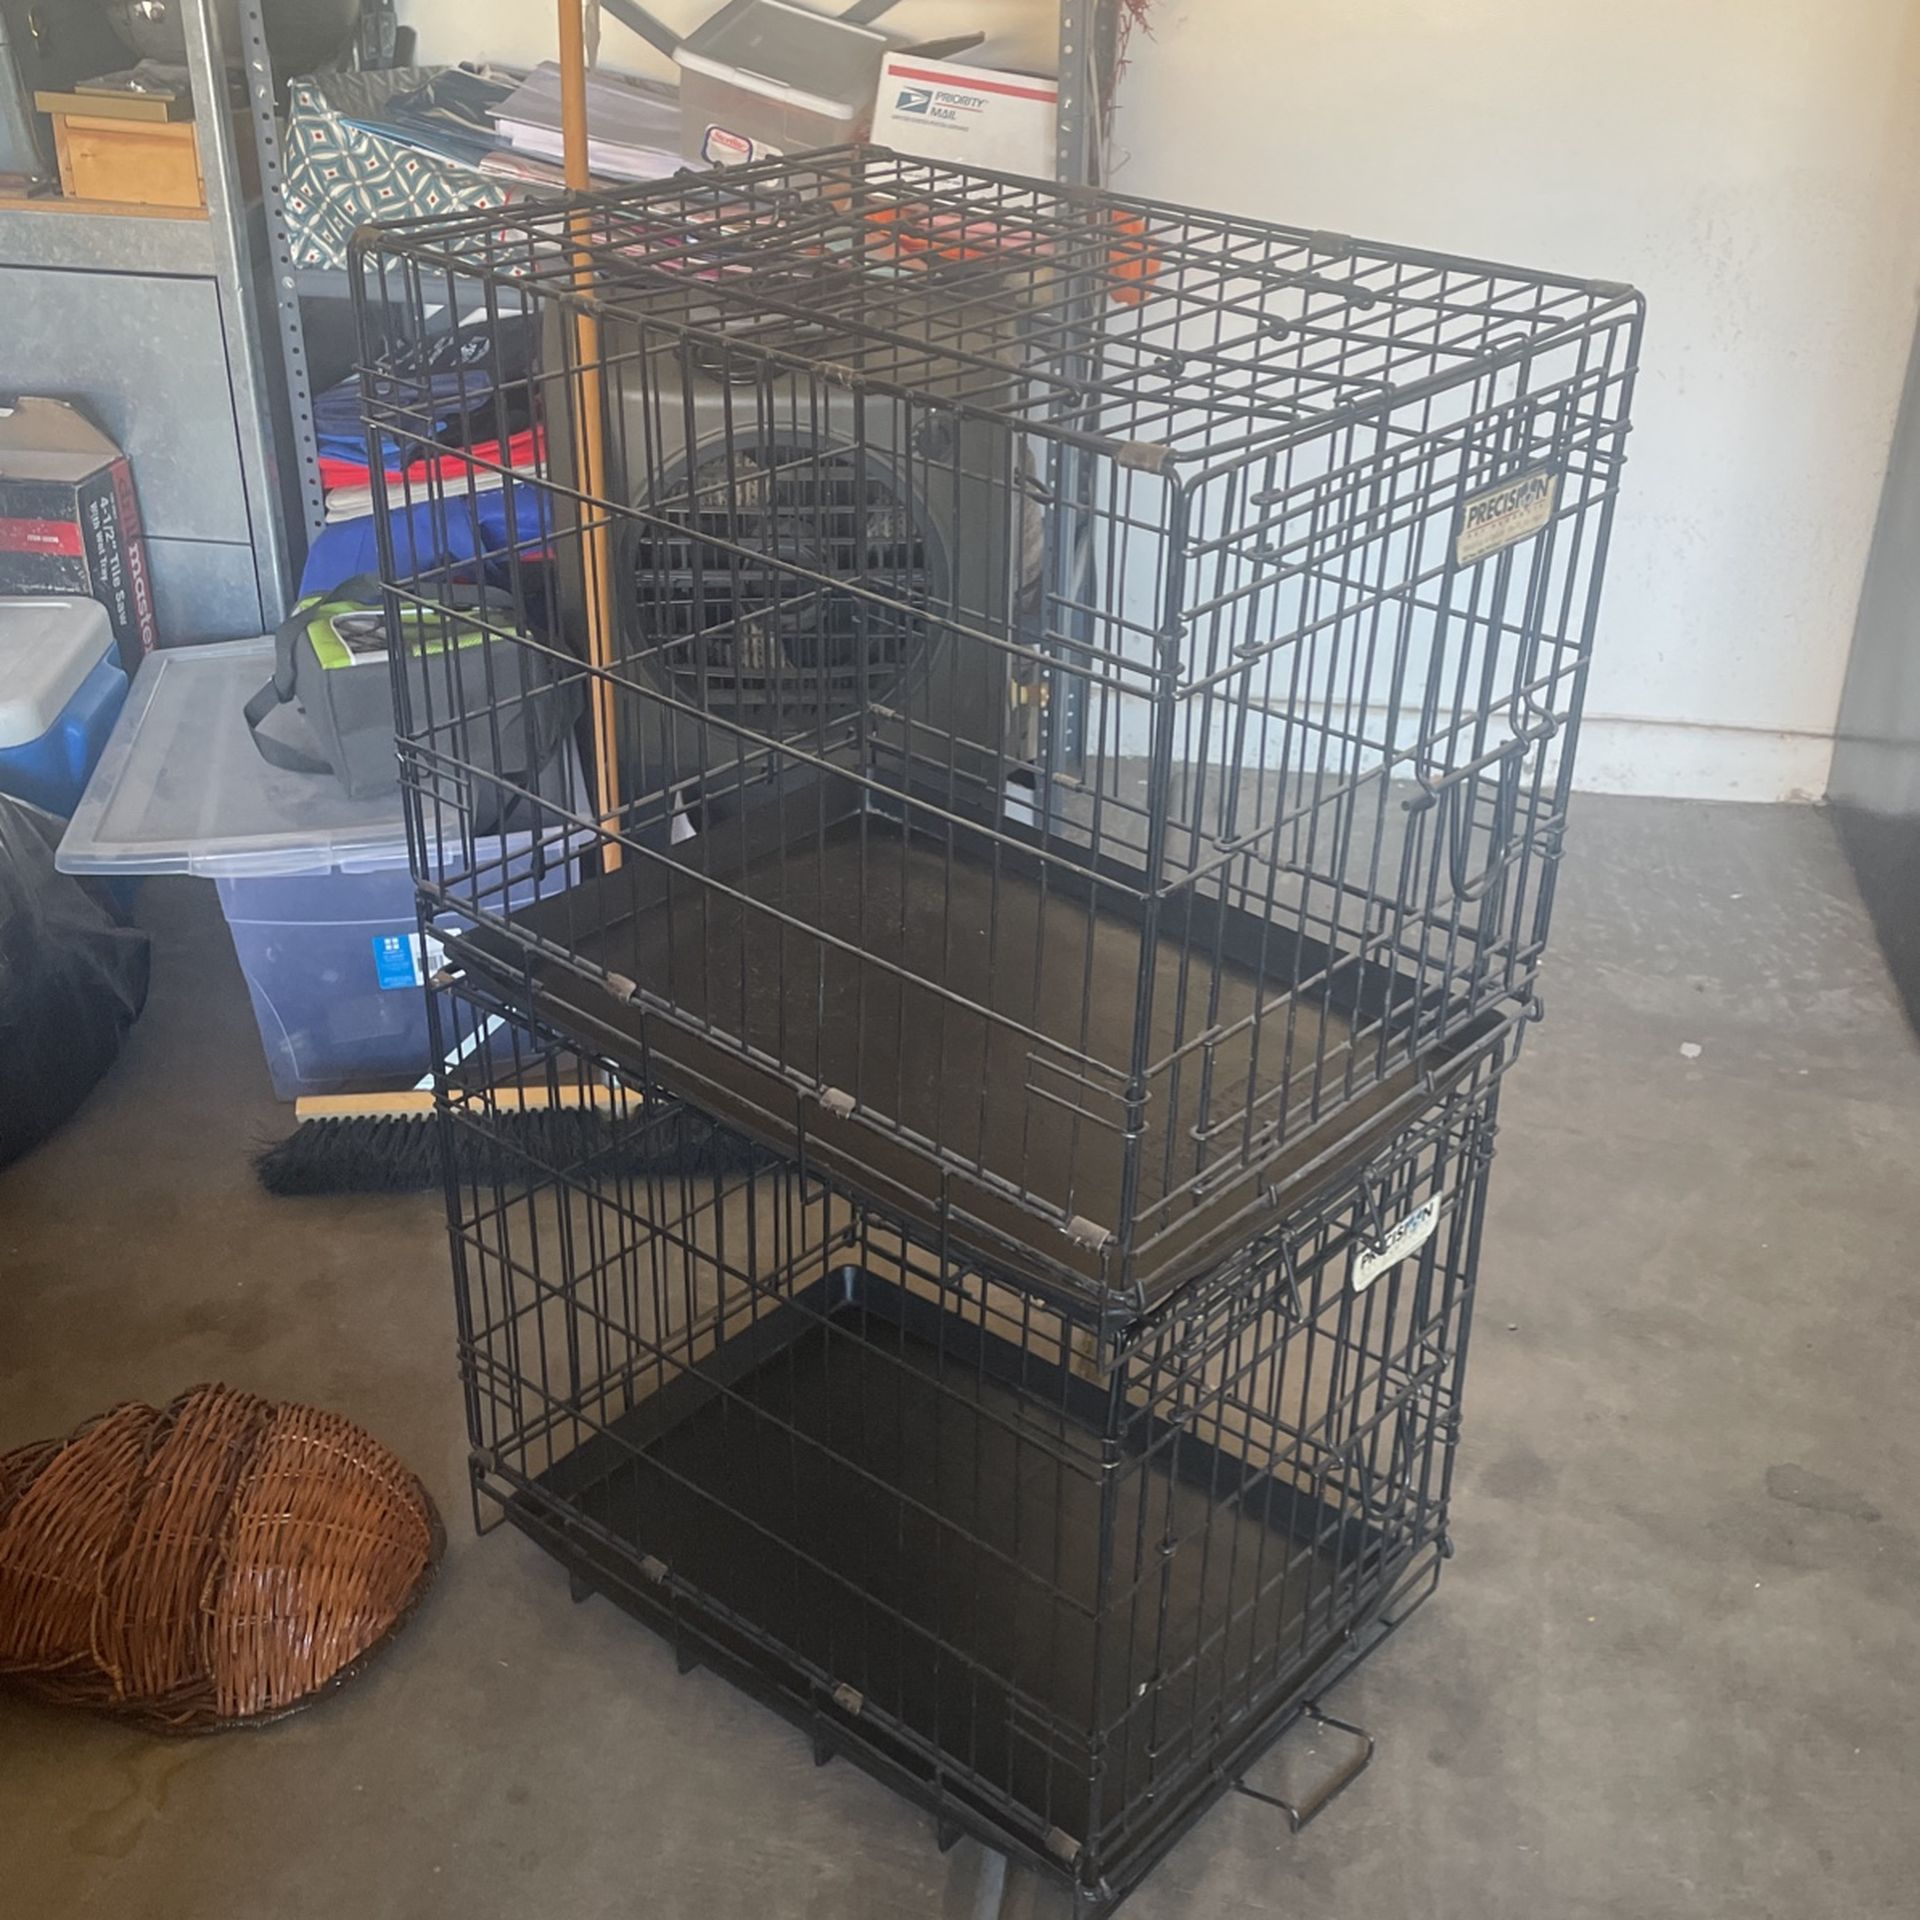 Price Reduced Today! Dog Crates Both For $25